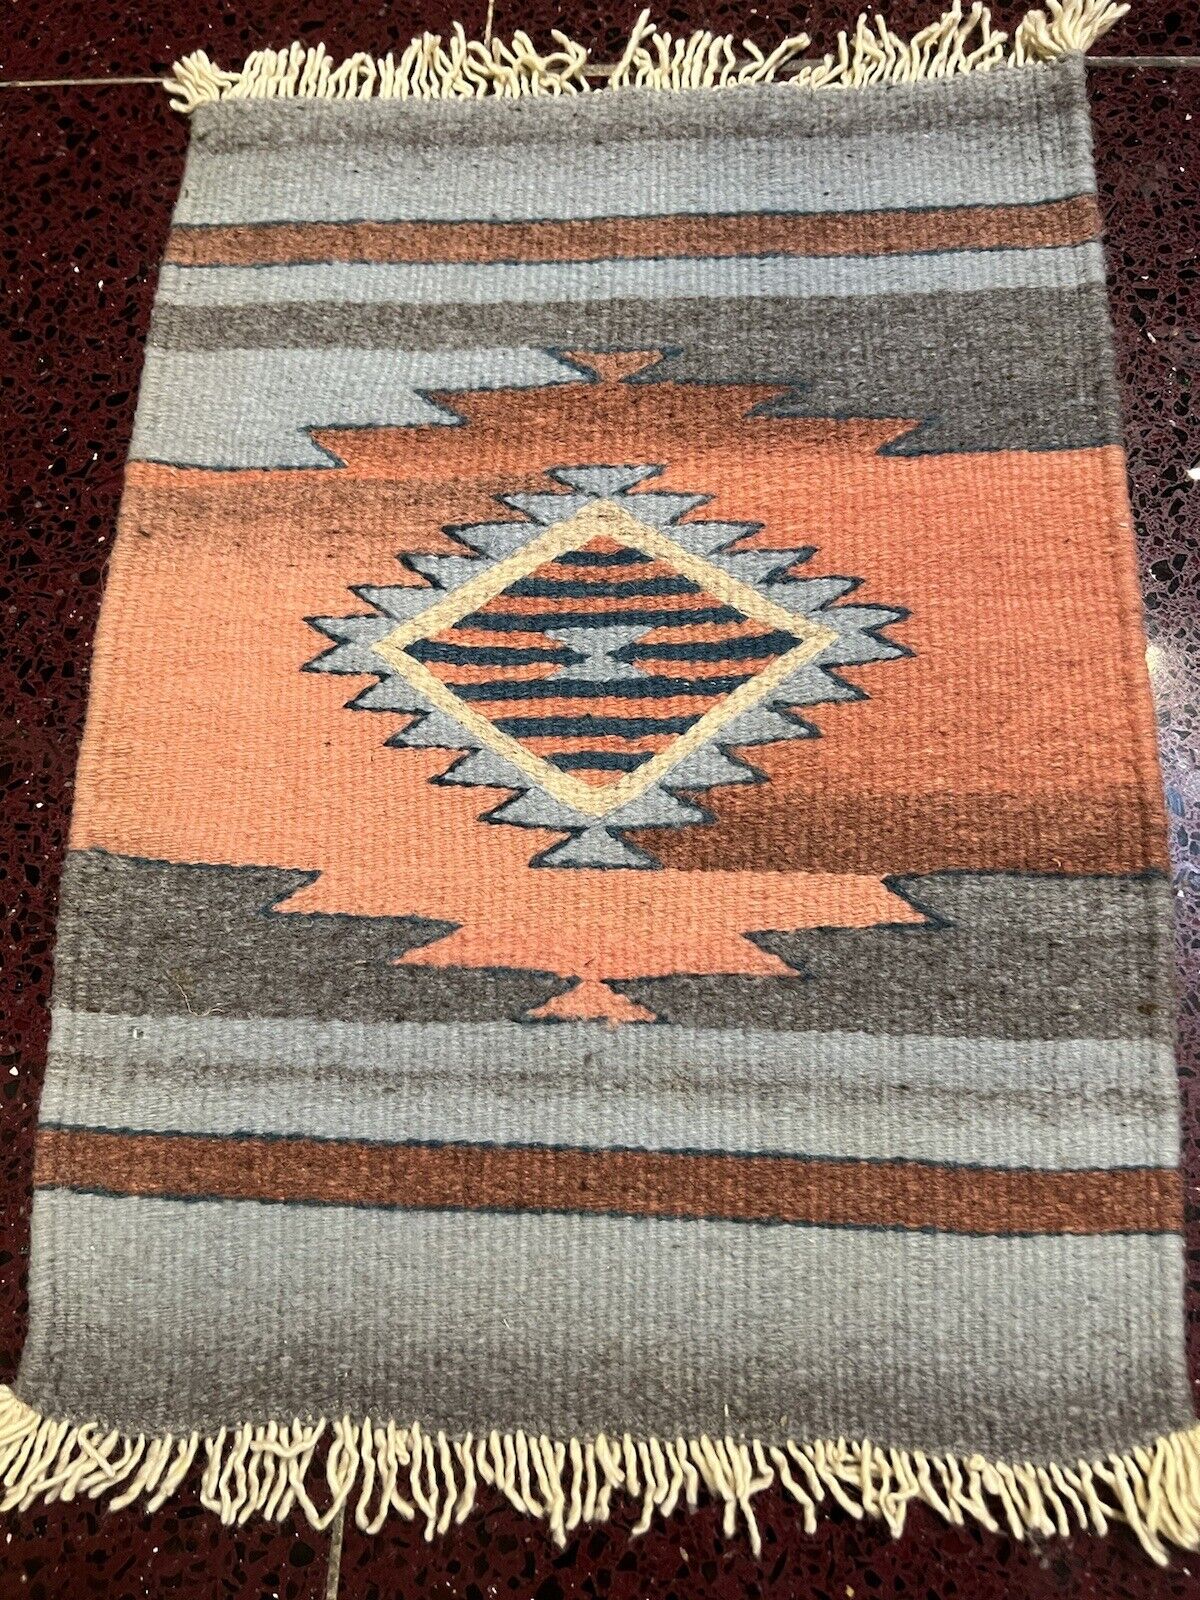 Vintage Southwestern Indian Style RUG HAND WOVEN Wool  with fringe 20 in x 15in